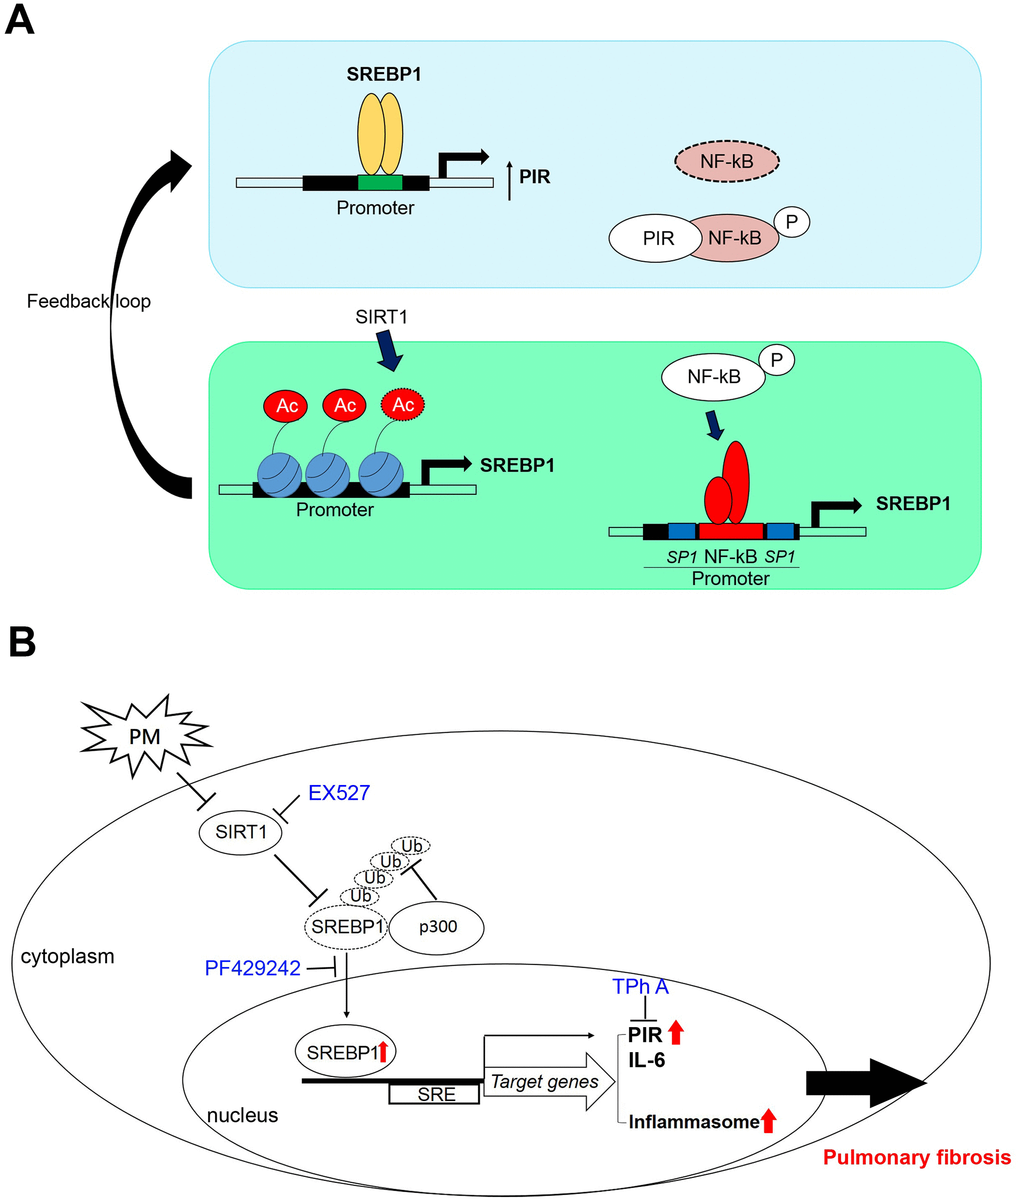 A model illustrates that PM activates the SREBP1-PIR/inflammasomes signaling axis through SIRT1 -mediated modulation. (A) A schematic model to describe the positive feedback loop and detailed mechanisms of the SIRT1-SREBP1-PIR axis and crosstalk with NF-κB signaling. (B) SIRT1 modulates the SREBP1-PIR/NLRP3 inflammasome axis in response to PM. SIRT1 functions as a protector from PM exposure. The SIRT1-SREBP1-PIR/NLRP3 inflammasome axis may present an attractive therapeutic target for PM-related adverse health events.